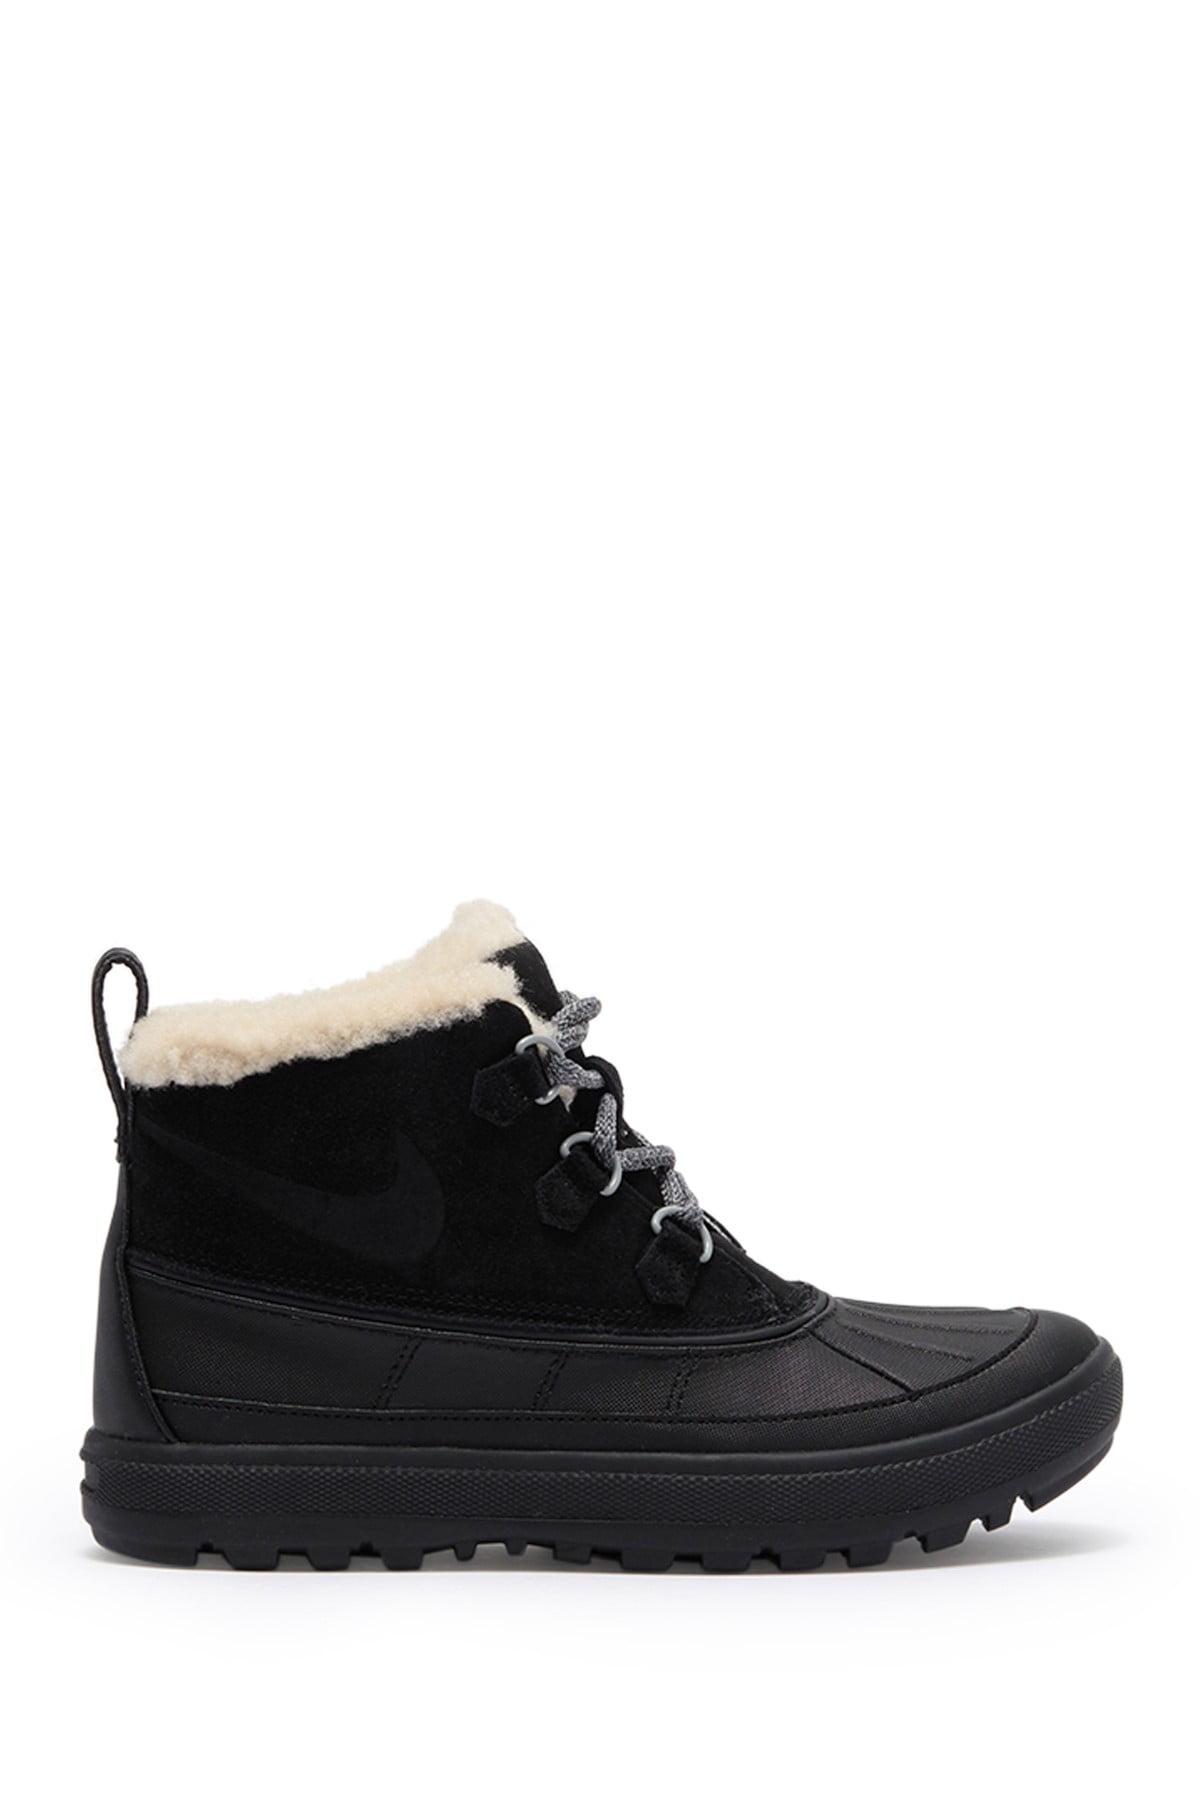 Nike Woodside Faux Fur Lined Chukka Boot in 1-Black/Anthracite (Black) |  Lyst